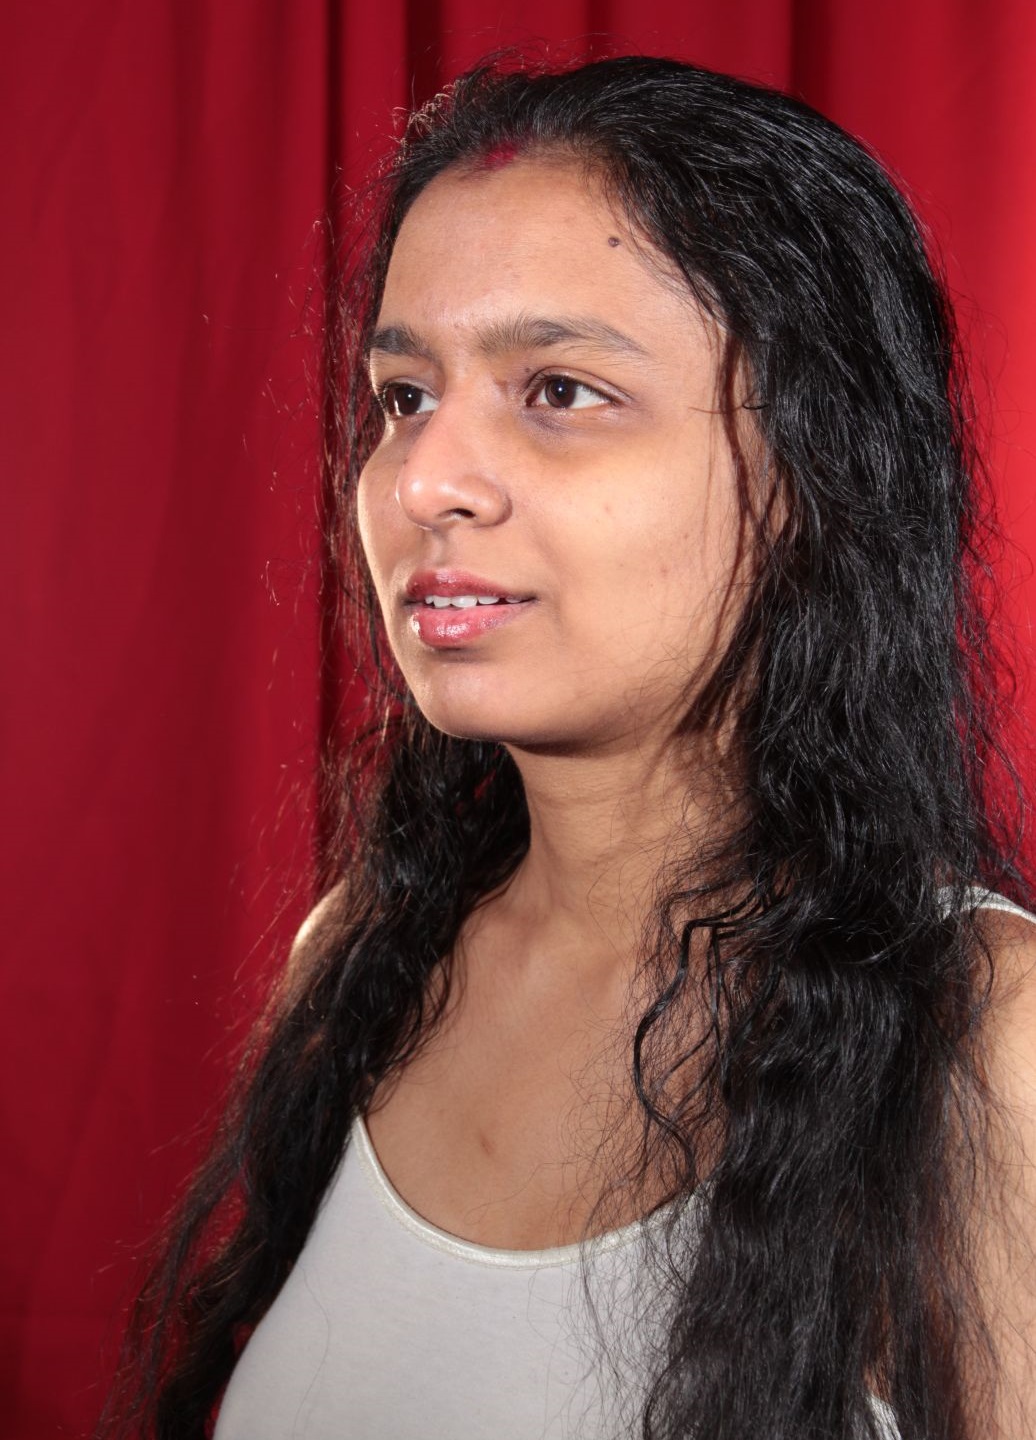 India woman in white top against red curtain